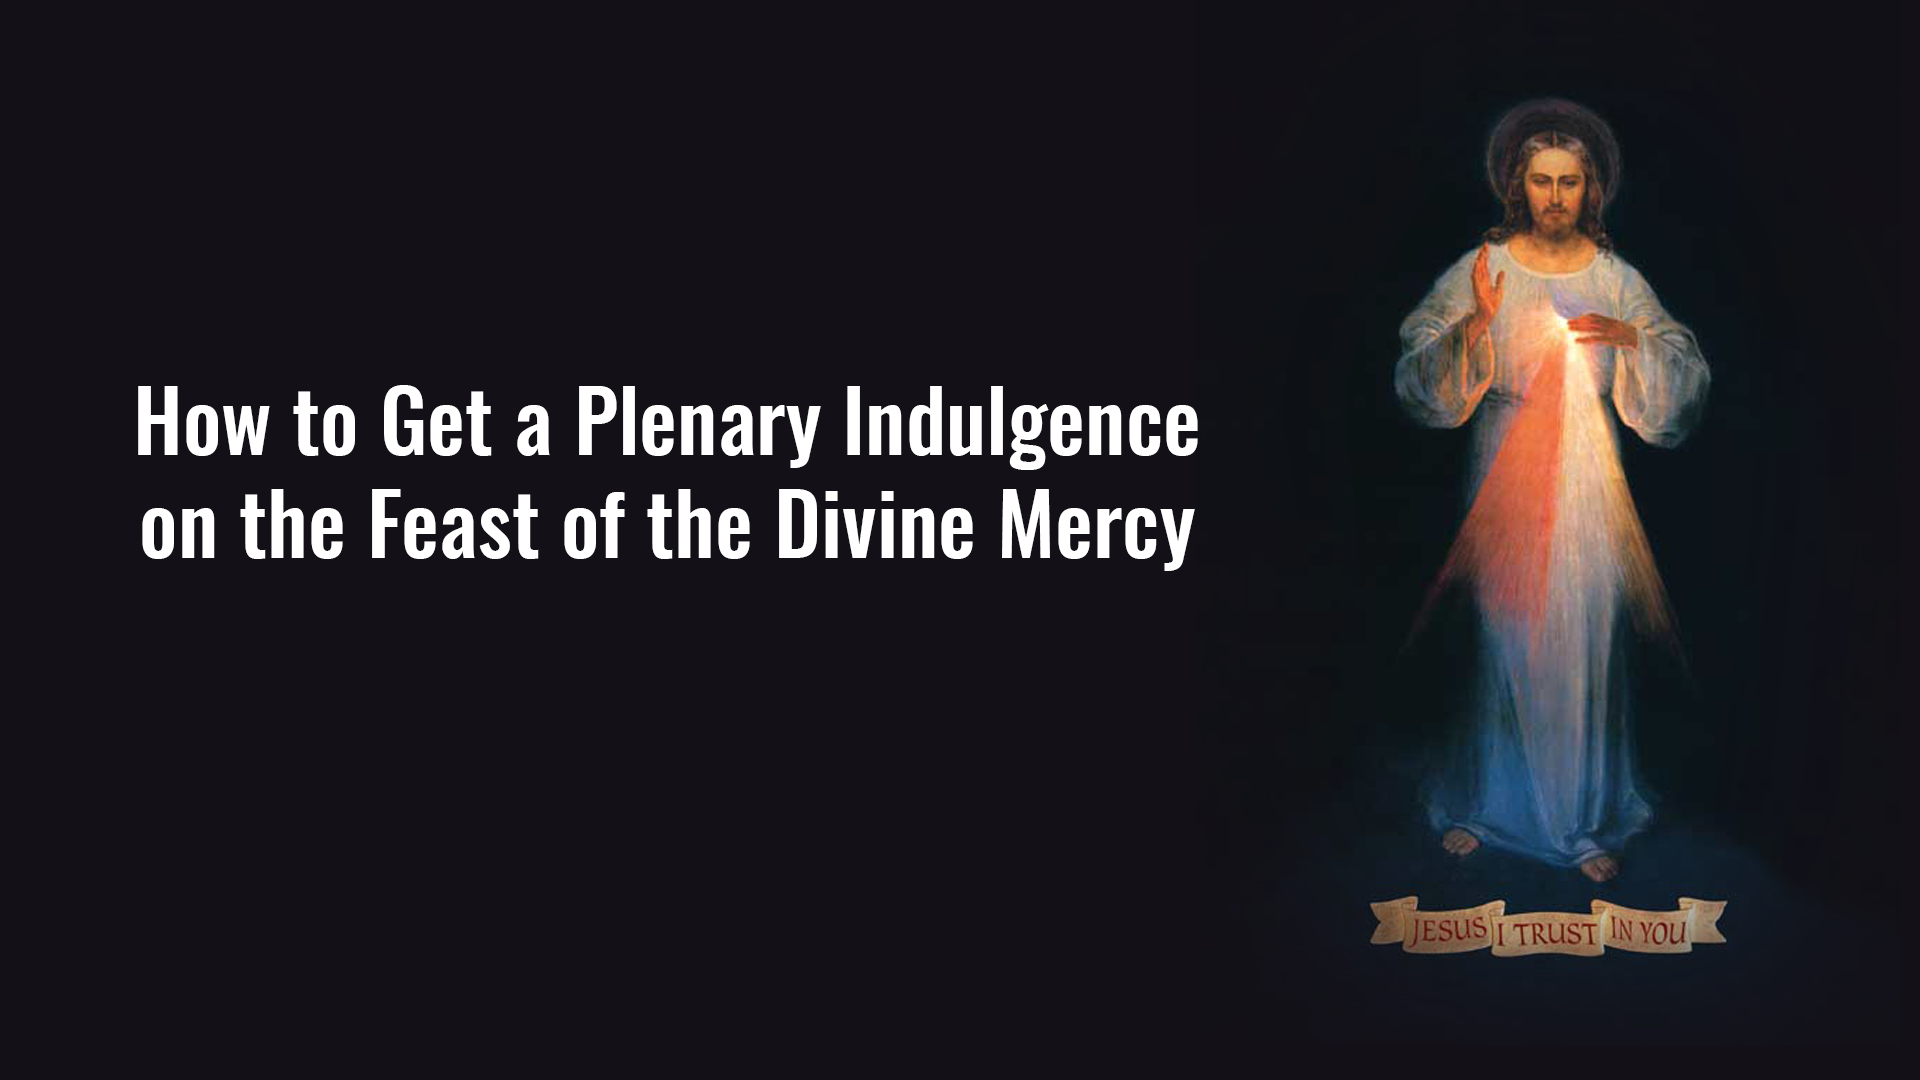 How to Get a Plenary Indulgence on the Feast of the Divine Mercy